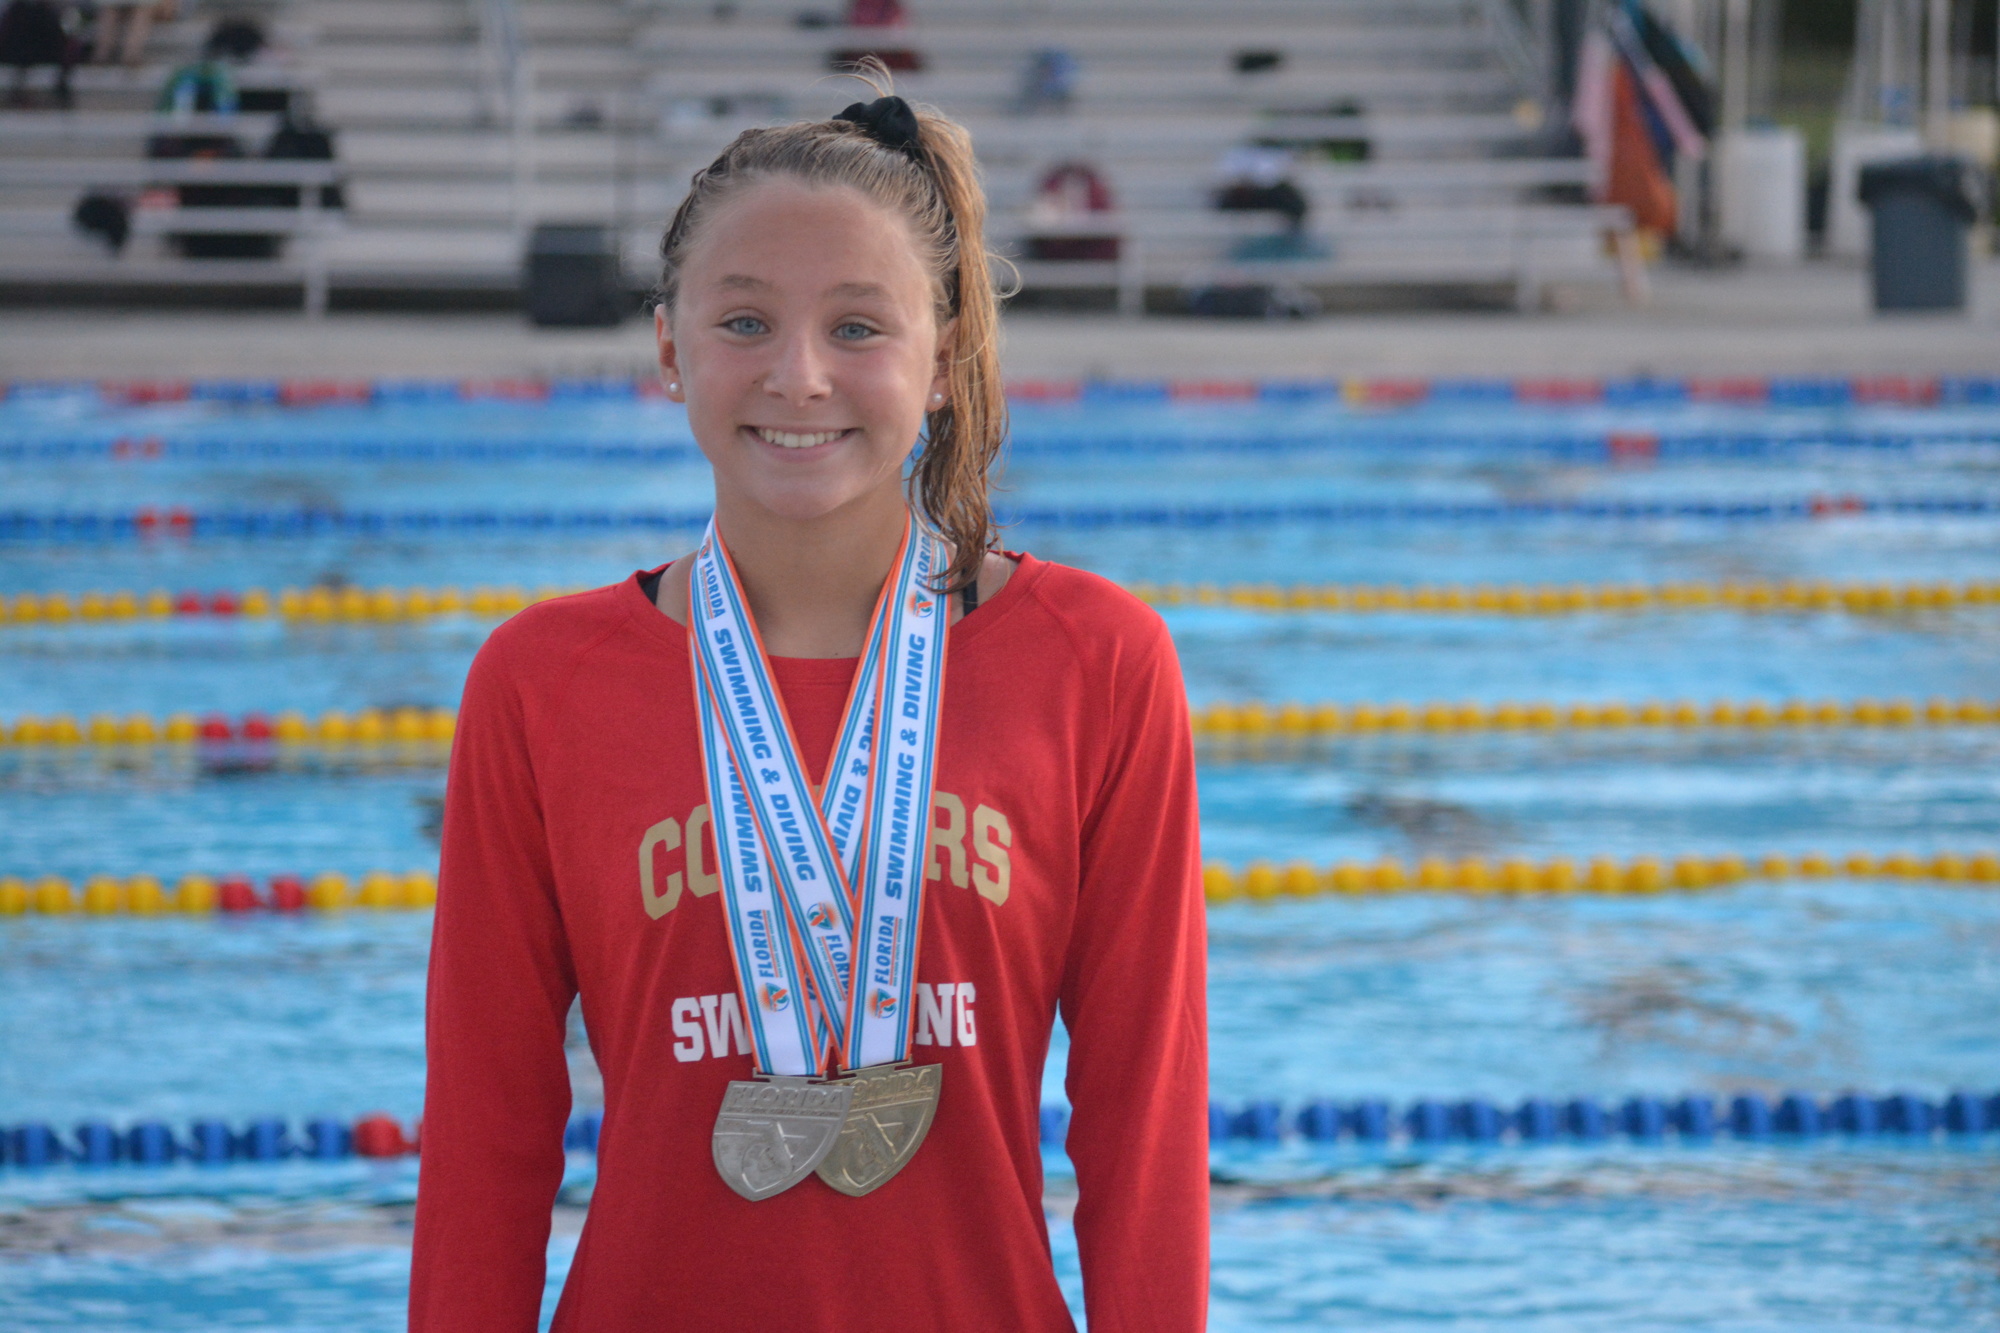 5. Cardinal Mooney freshman Michaela Mattes won gold and silver at the 2019 Class 1A state swimming championships.